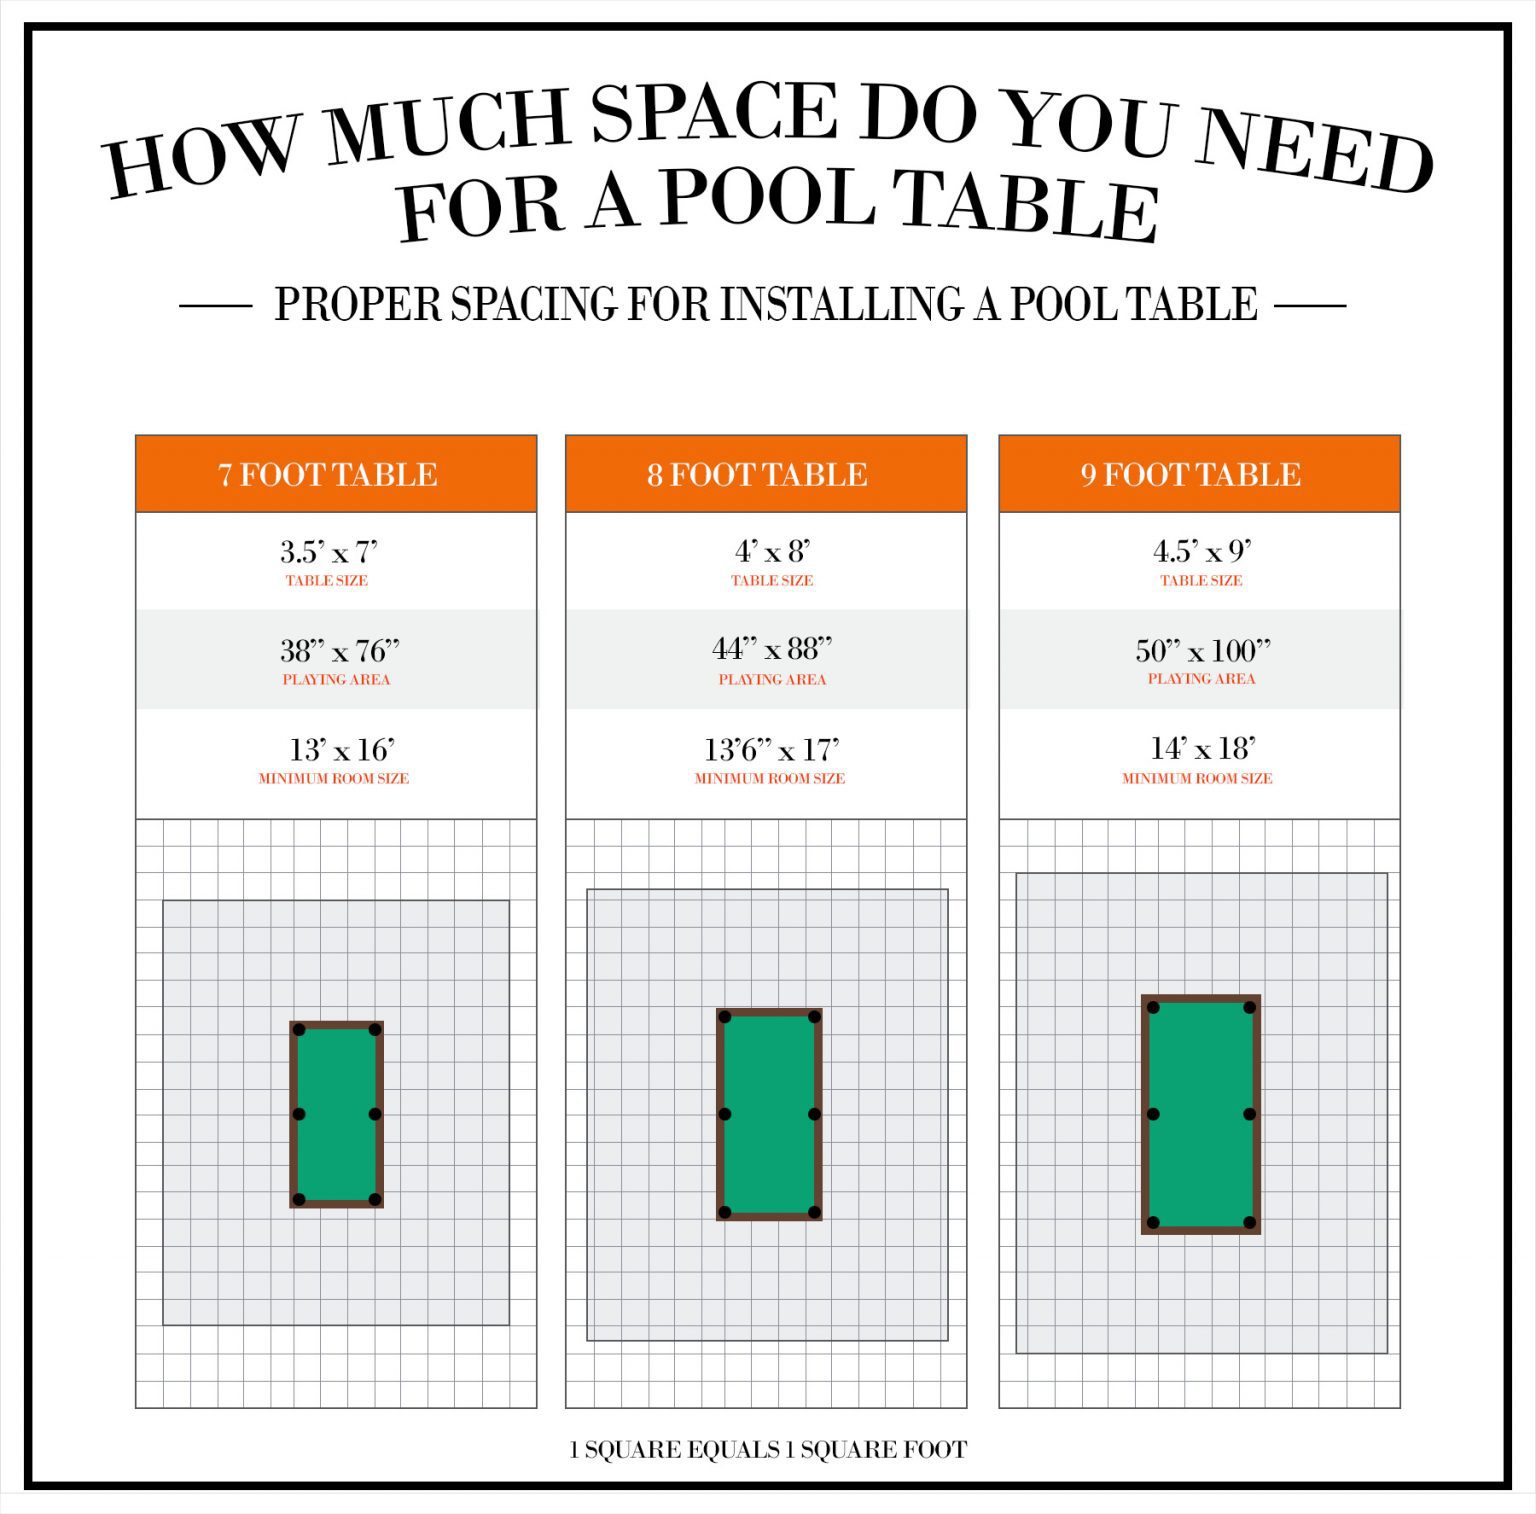 How Much Space Do You Need For A Pool Table Infographic 2 1536x1514 